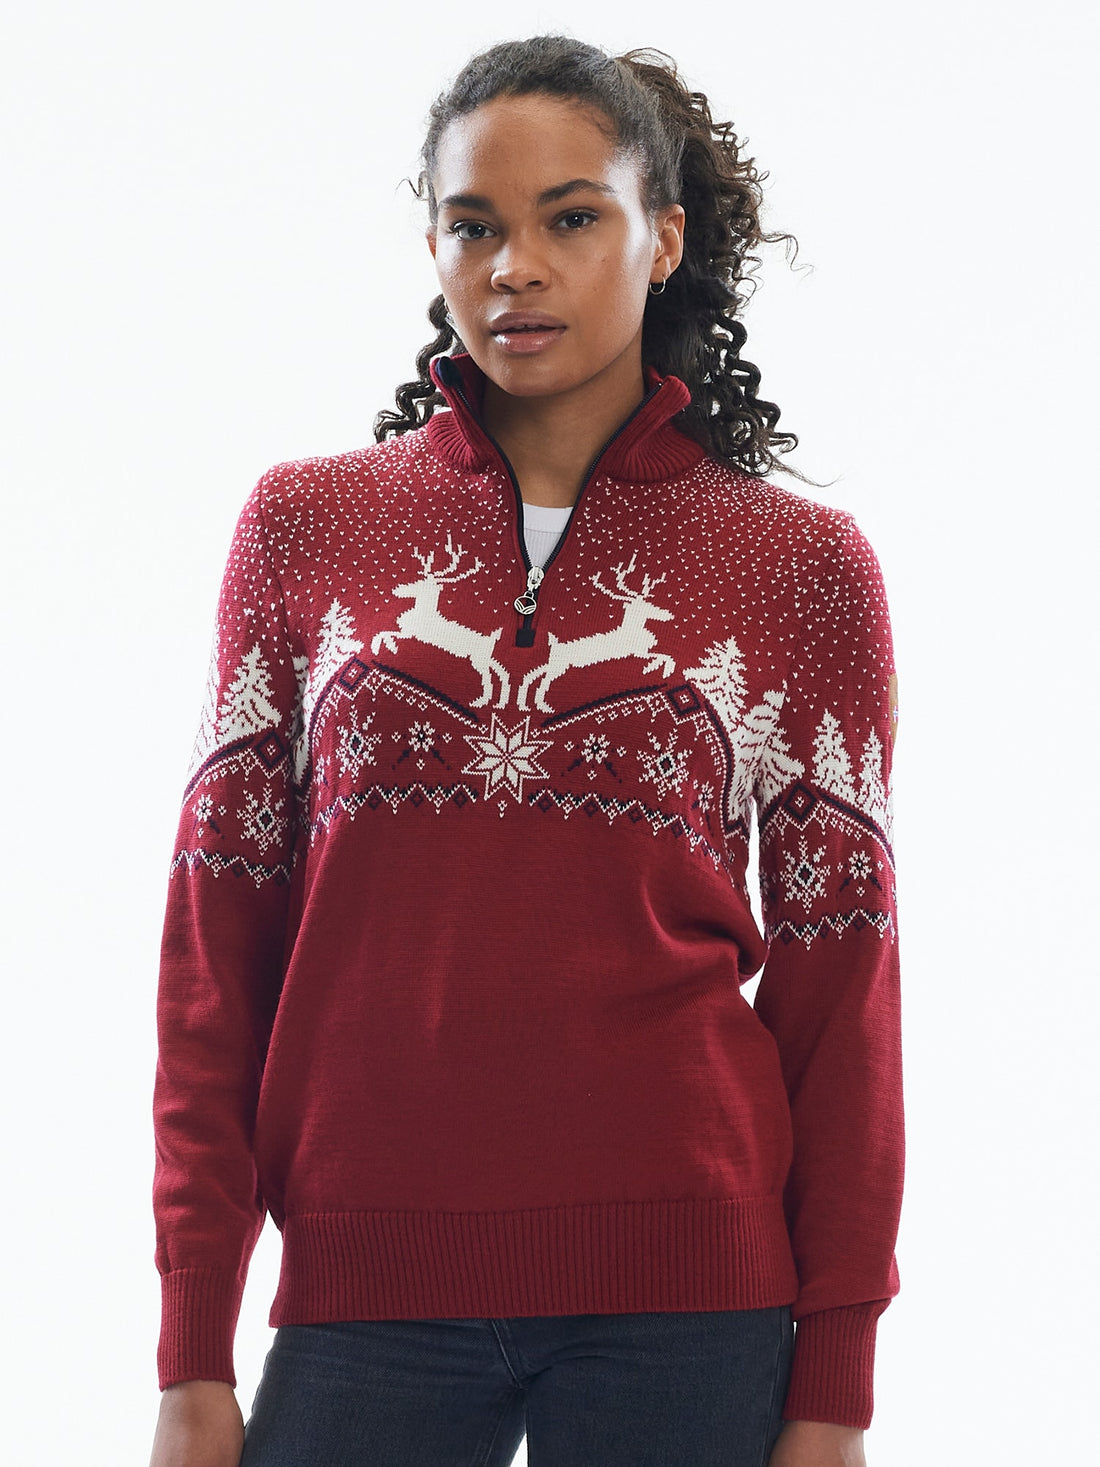 Dale of Norway - Christmas women's sweater - Red